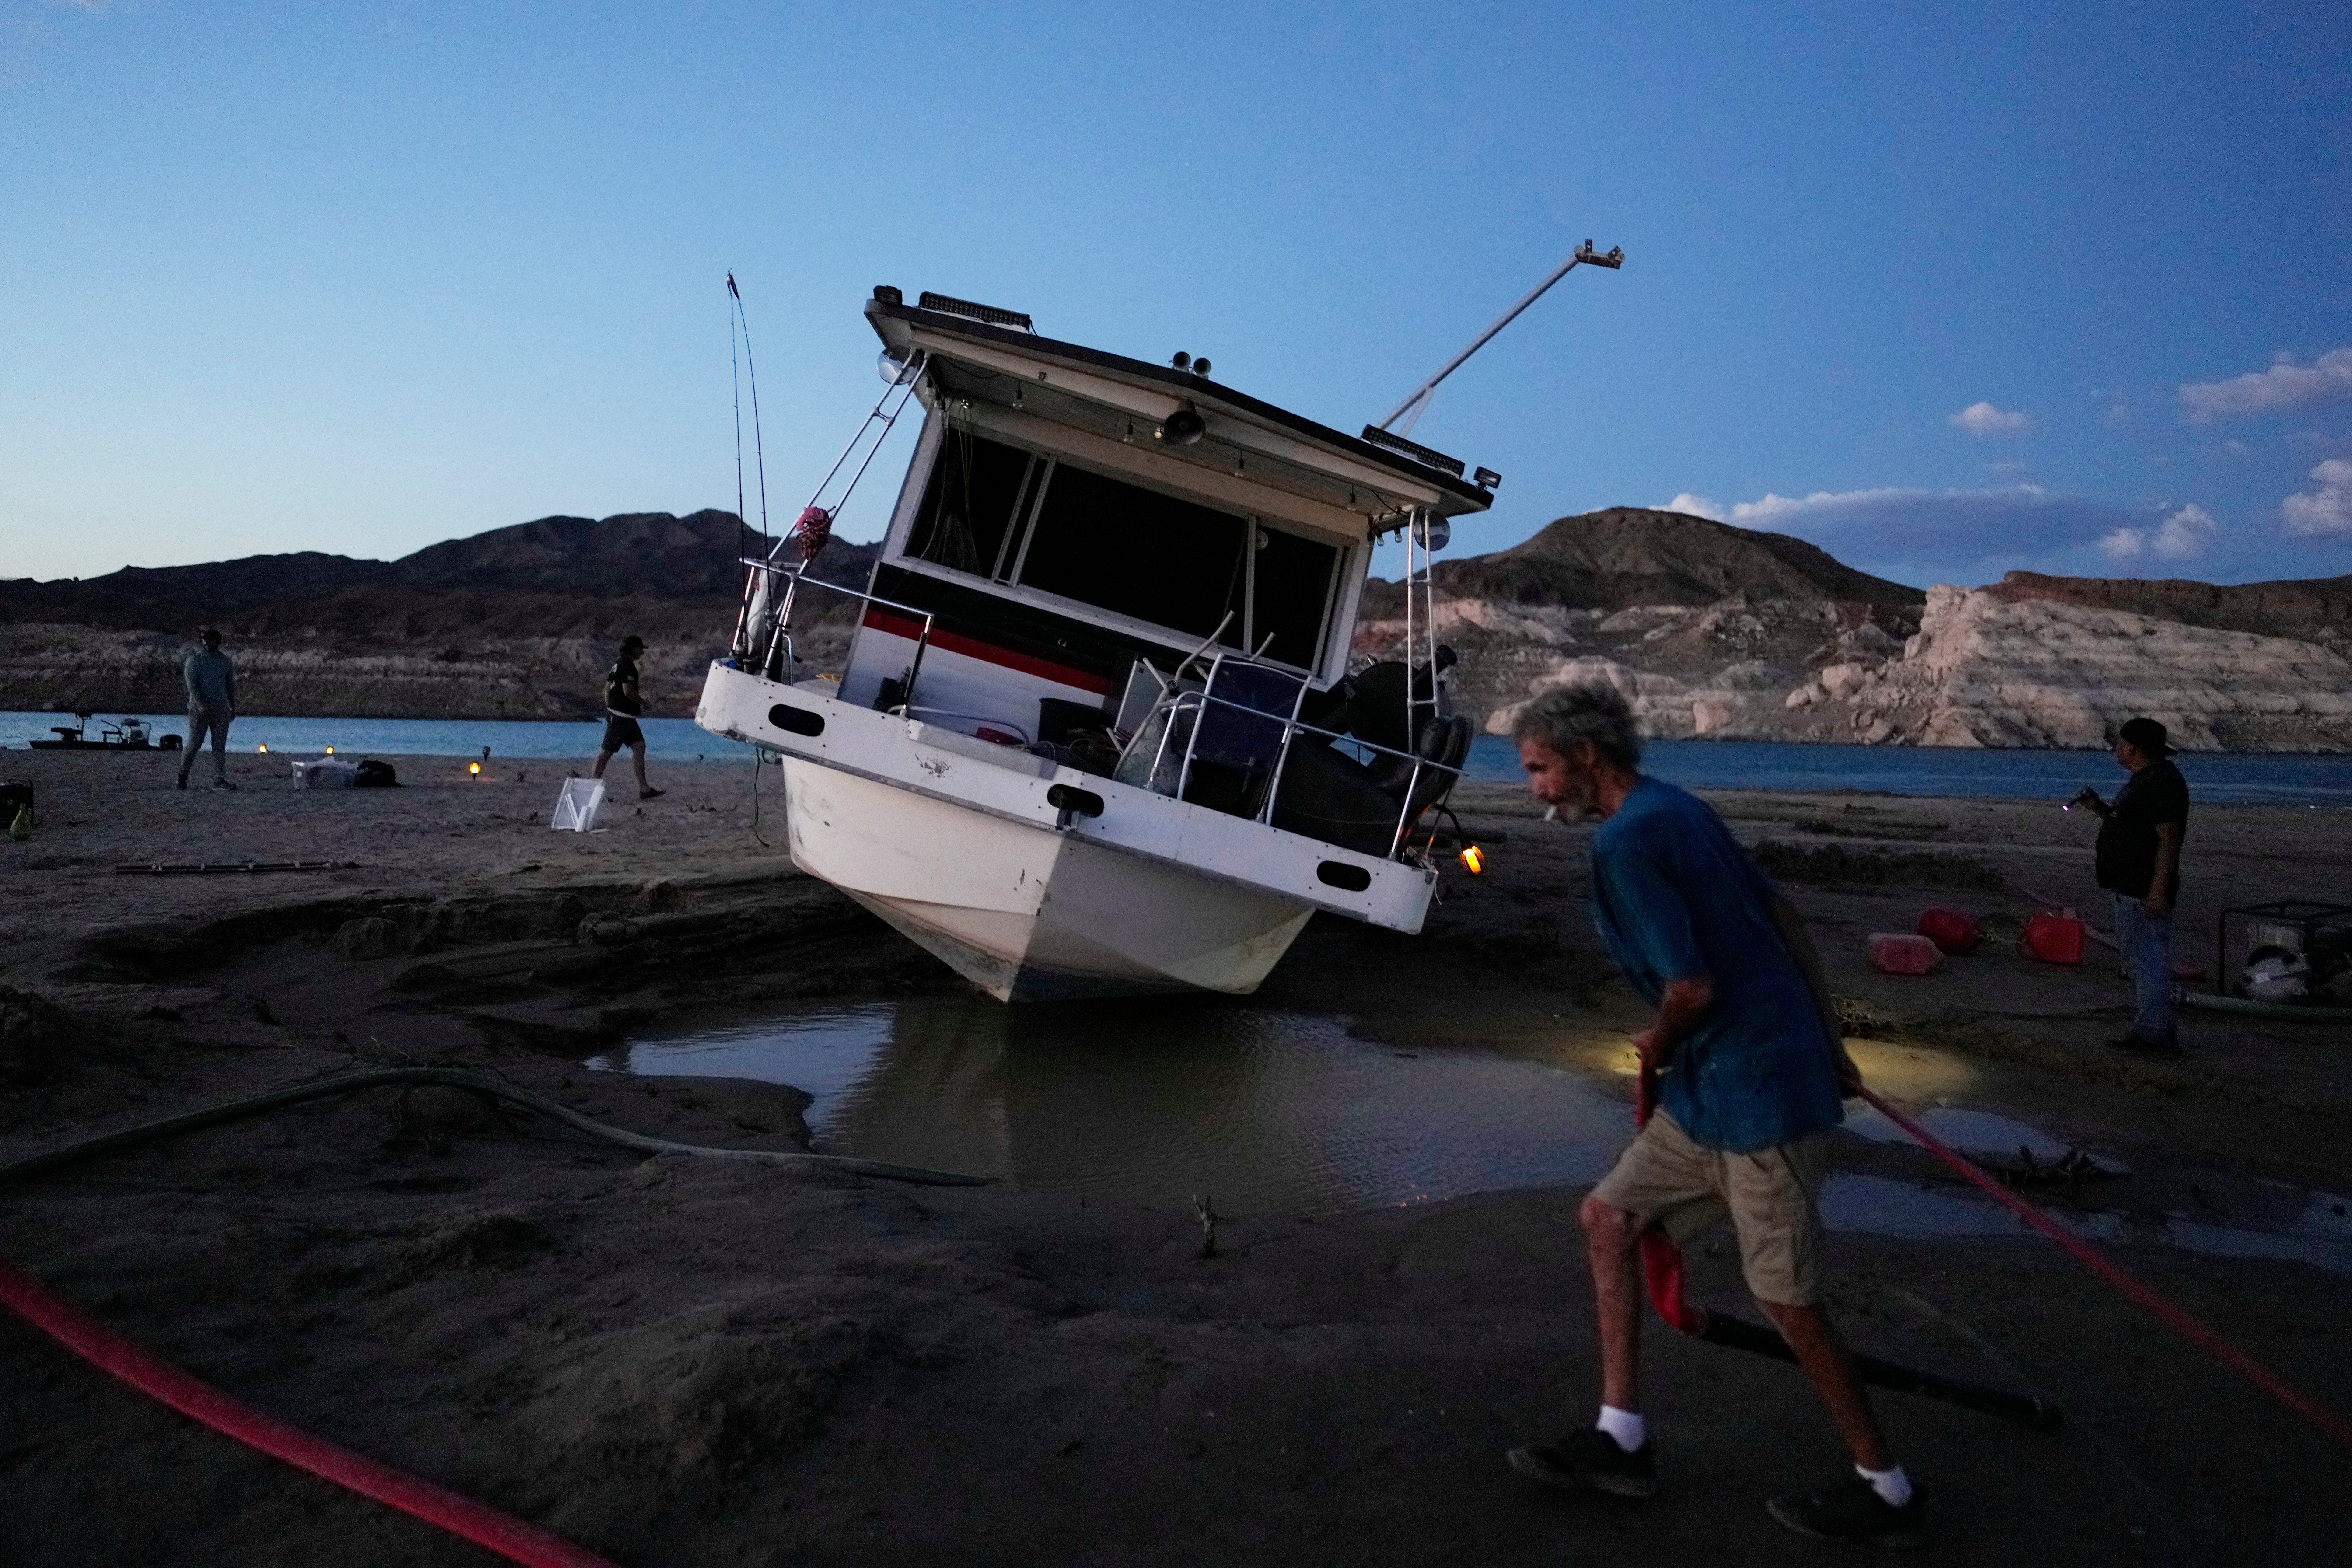 A man tries to free his stranded houseboat on Lake Mead. (Photo: John Locher, AP)